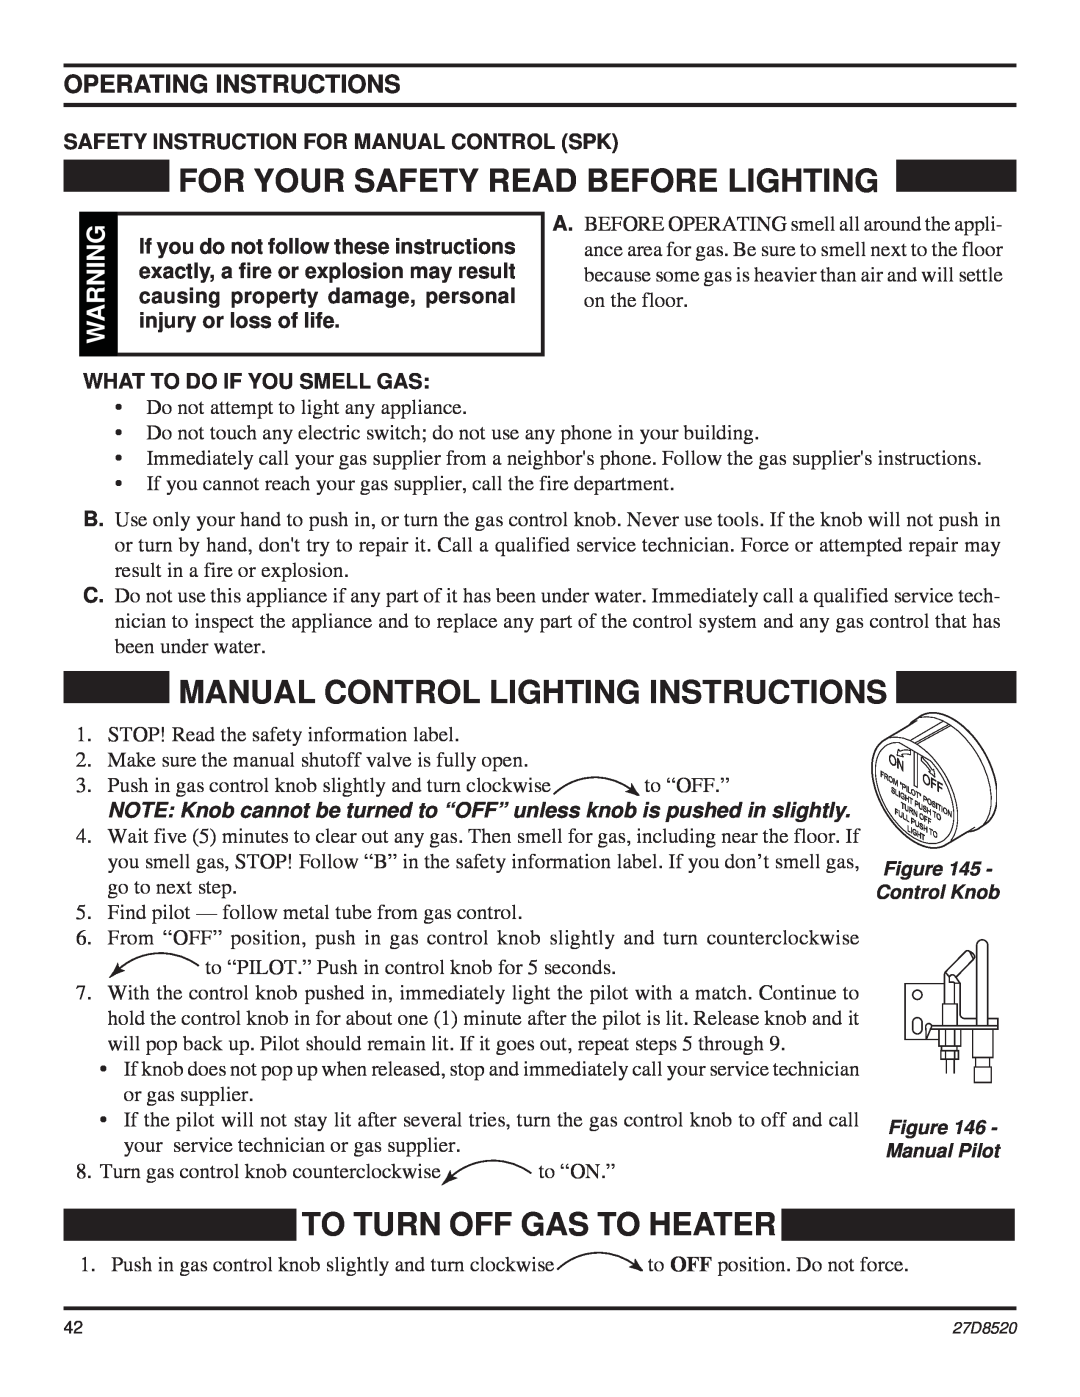 Monessen Hearth VWF36 For Your Safety Read Before Lighting, Manual Control Lighting Instructions, Operating Instructions 